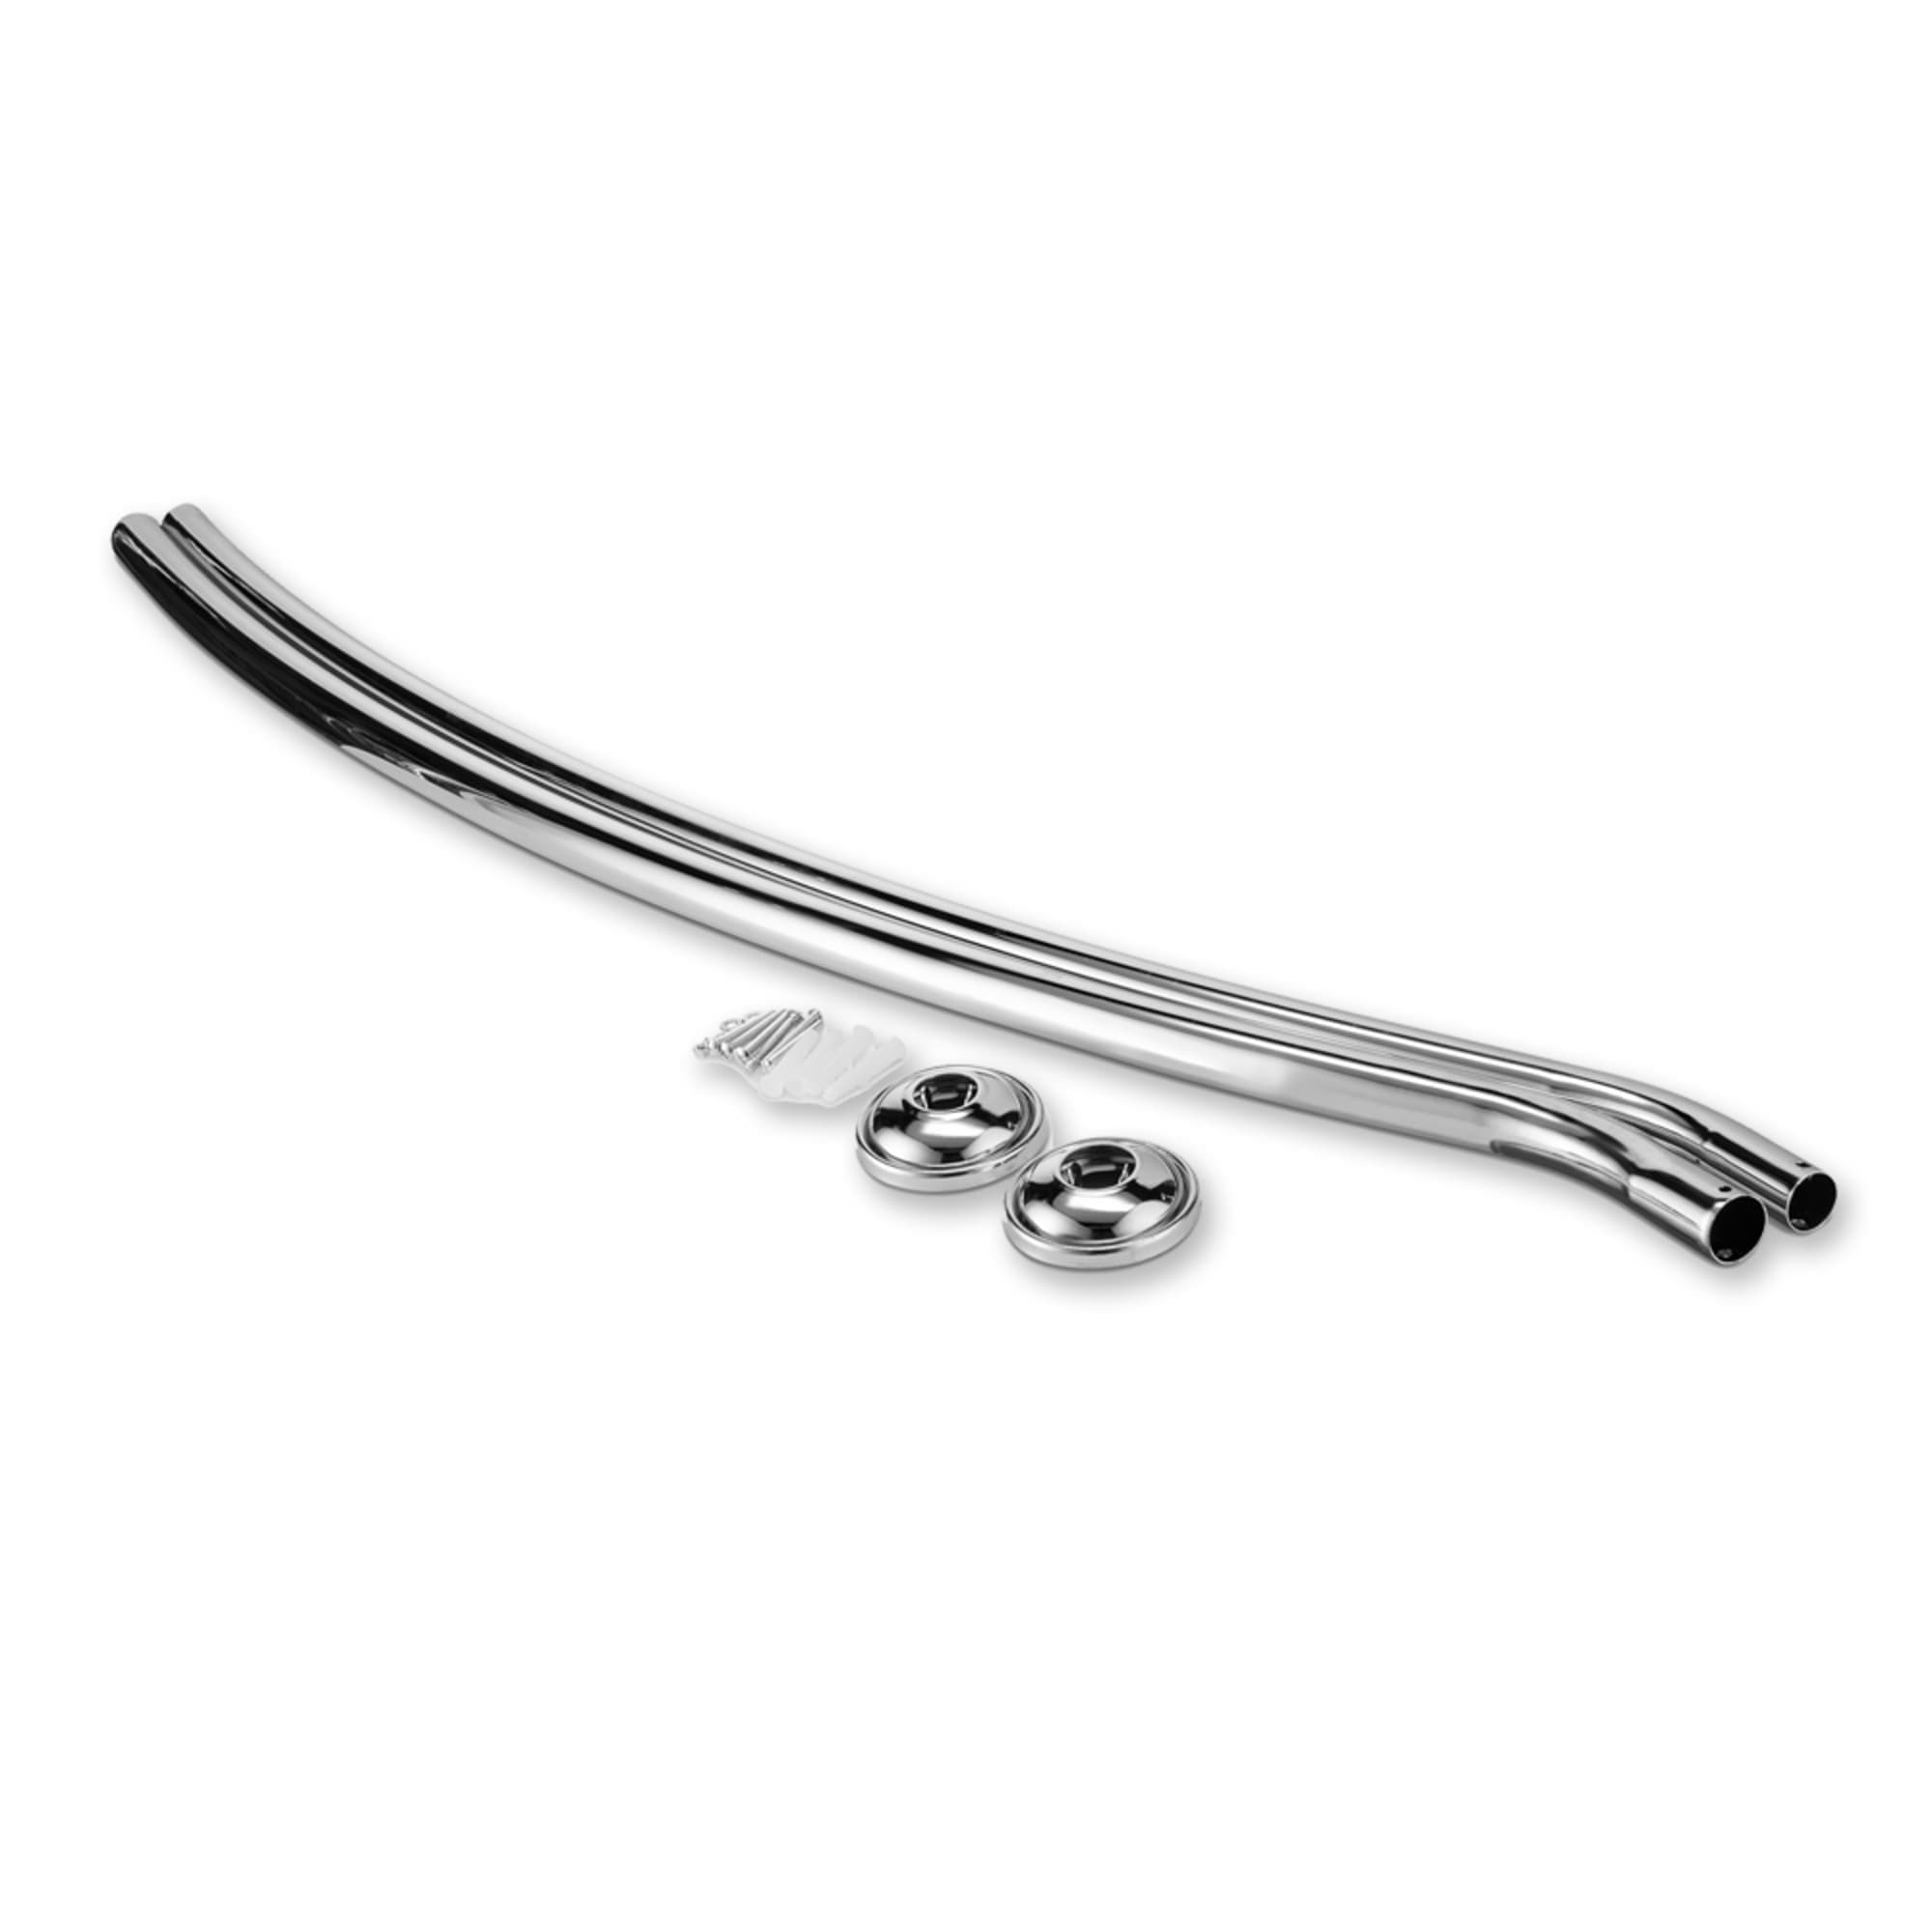 Home Basics Steel Curved Shower Rod, Chrome $15.00 EACH, CASE PACK OF 8